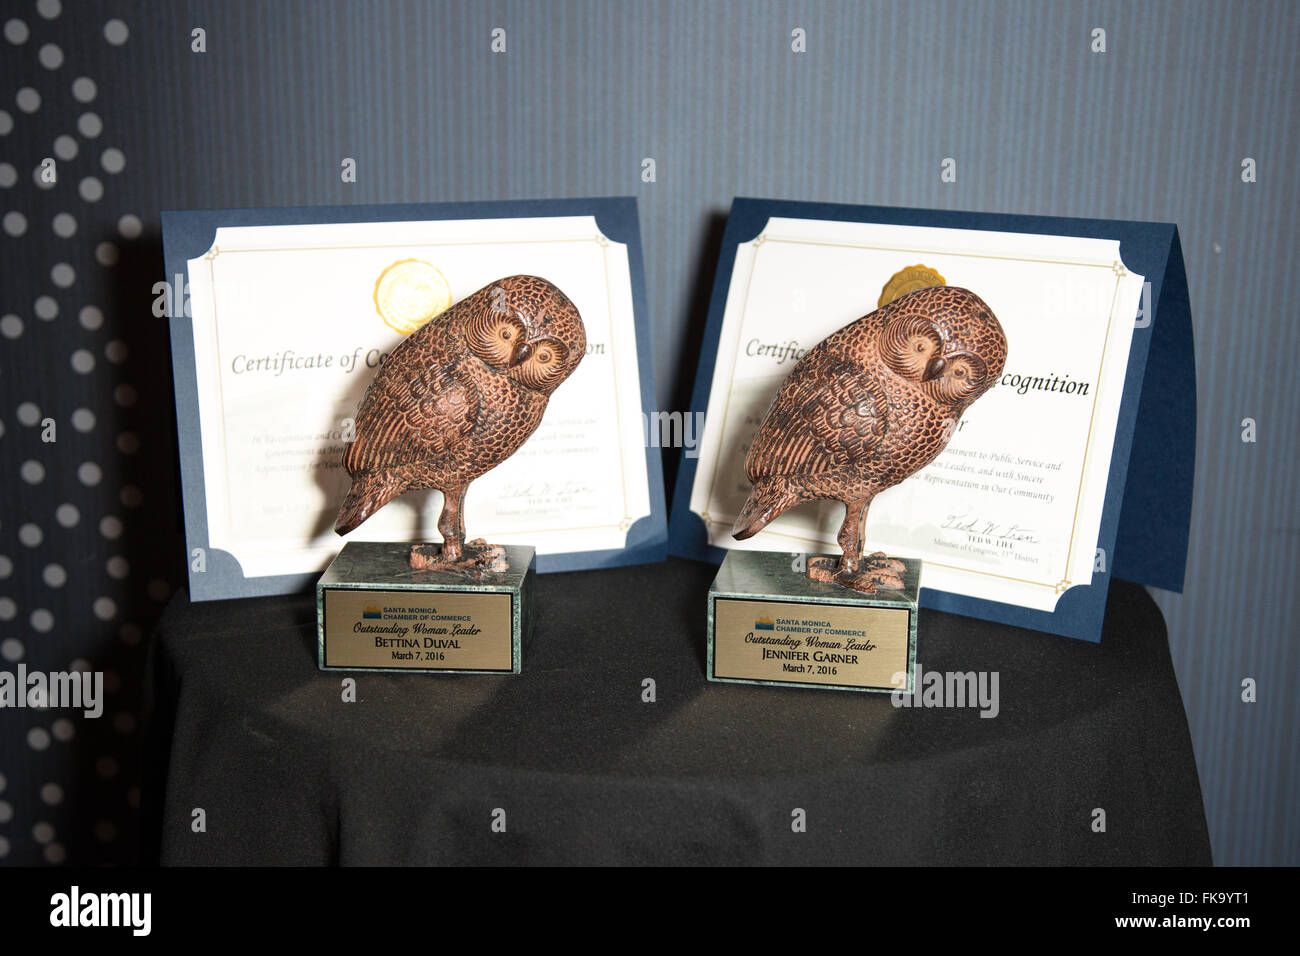 Santa Monica, California, USA. 7th March, 2016. The 'OWLIE' awards and certificates for Bettina Duval, president/founder of the CALIFORNIALIST, and Jennifer Garner, actress/philanthropist, on the presenter's table at the annual Santa Monica Chamber of Commerce's 'Organization for Women Leaders' (OWL) International Women's Day Breakfast at the Le Meridien Delfina Hotel in Santa Monica, California, USA. Duval and Garner were each honored with  an'OWLIE' award in recognition of their outstanding commitment and public service to the community.  Credit:  Sheri Determan/Alamy Live News Stock Photo